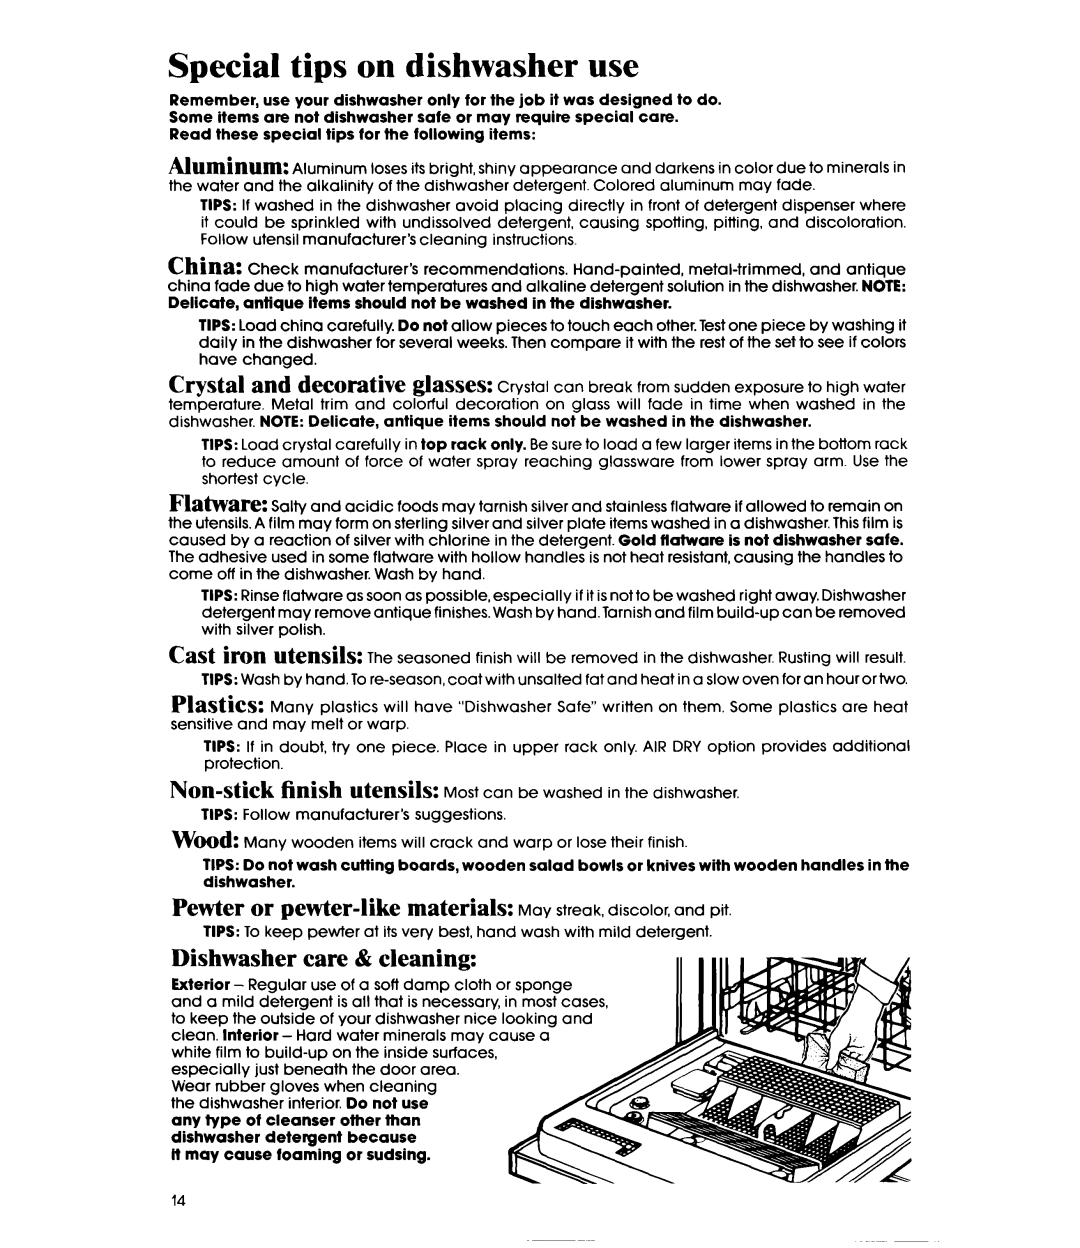 Whirlpool DU9450XT manual Special tips on dishwasher use, China, Dishwasher care & cleaning 